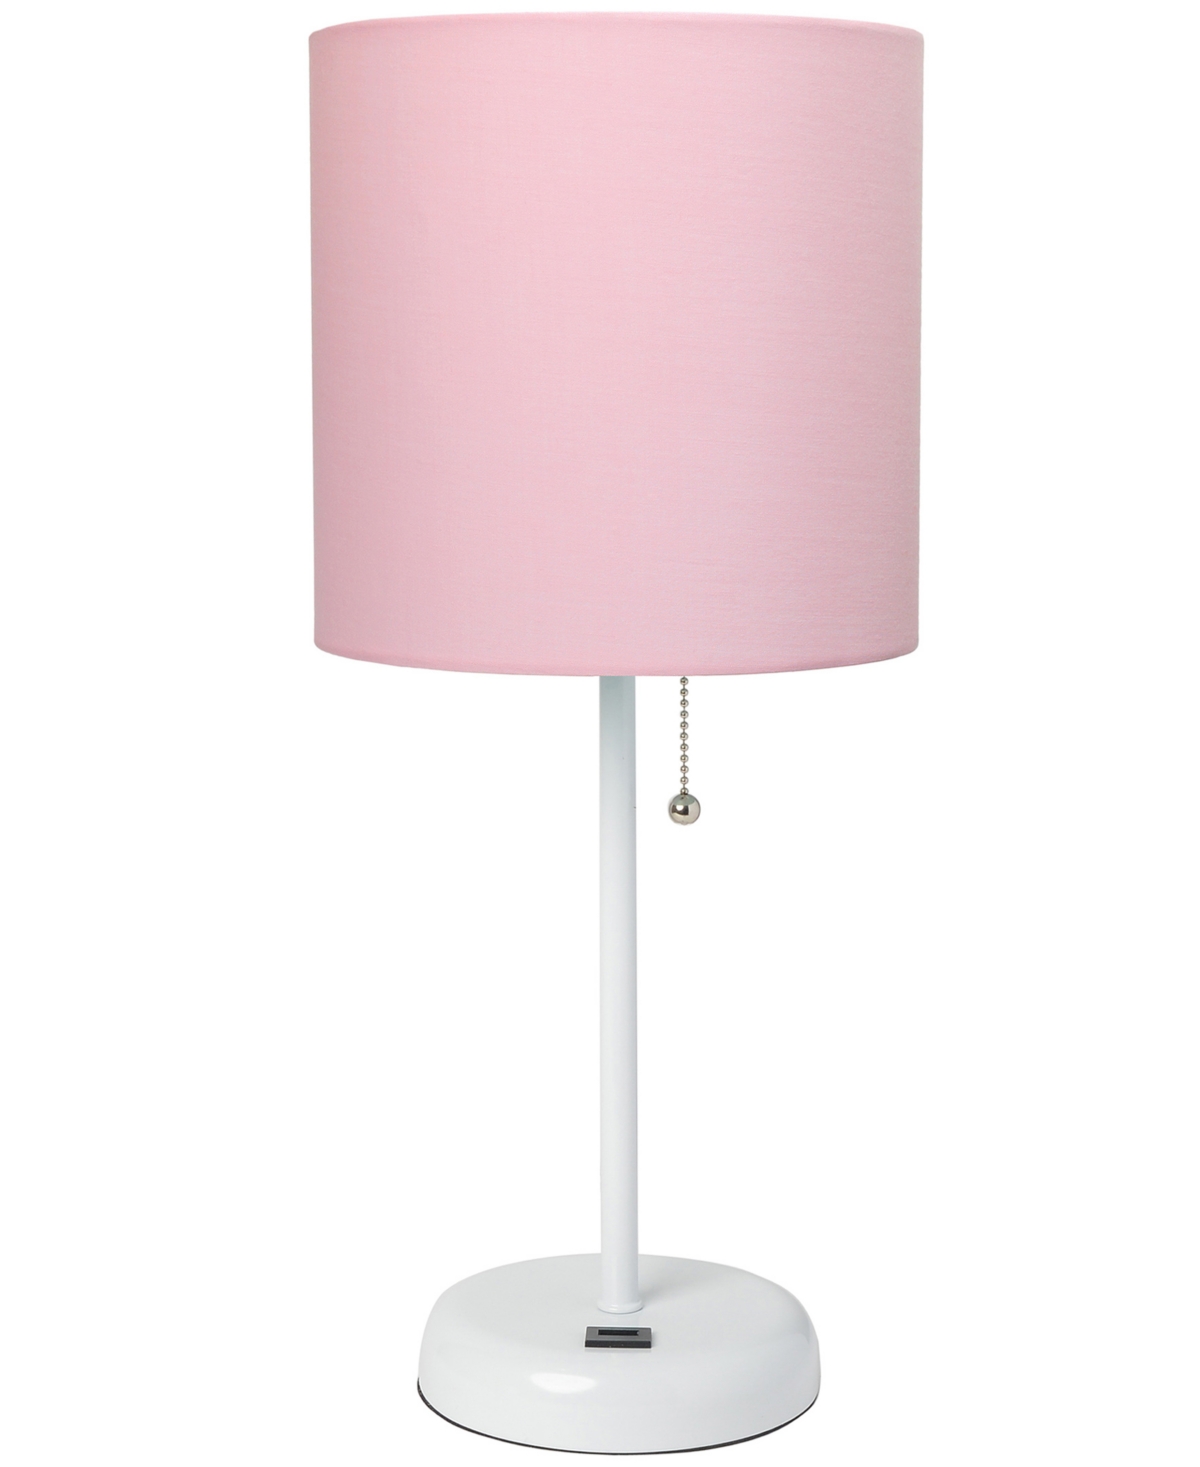 Shop Creekwood Home Oslo 19.5" Contemporary Bedside Usb Port Feature Standard Metal Table Desk Lamp In White,light Pink